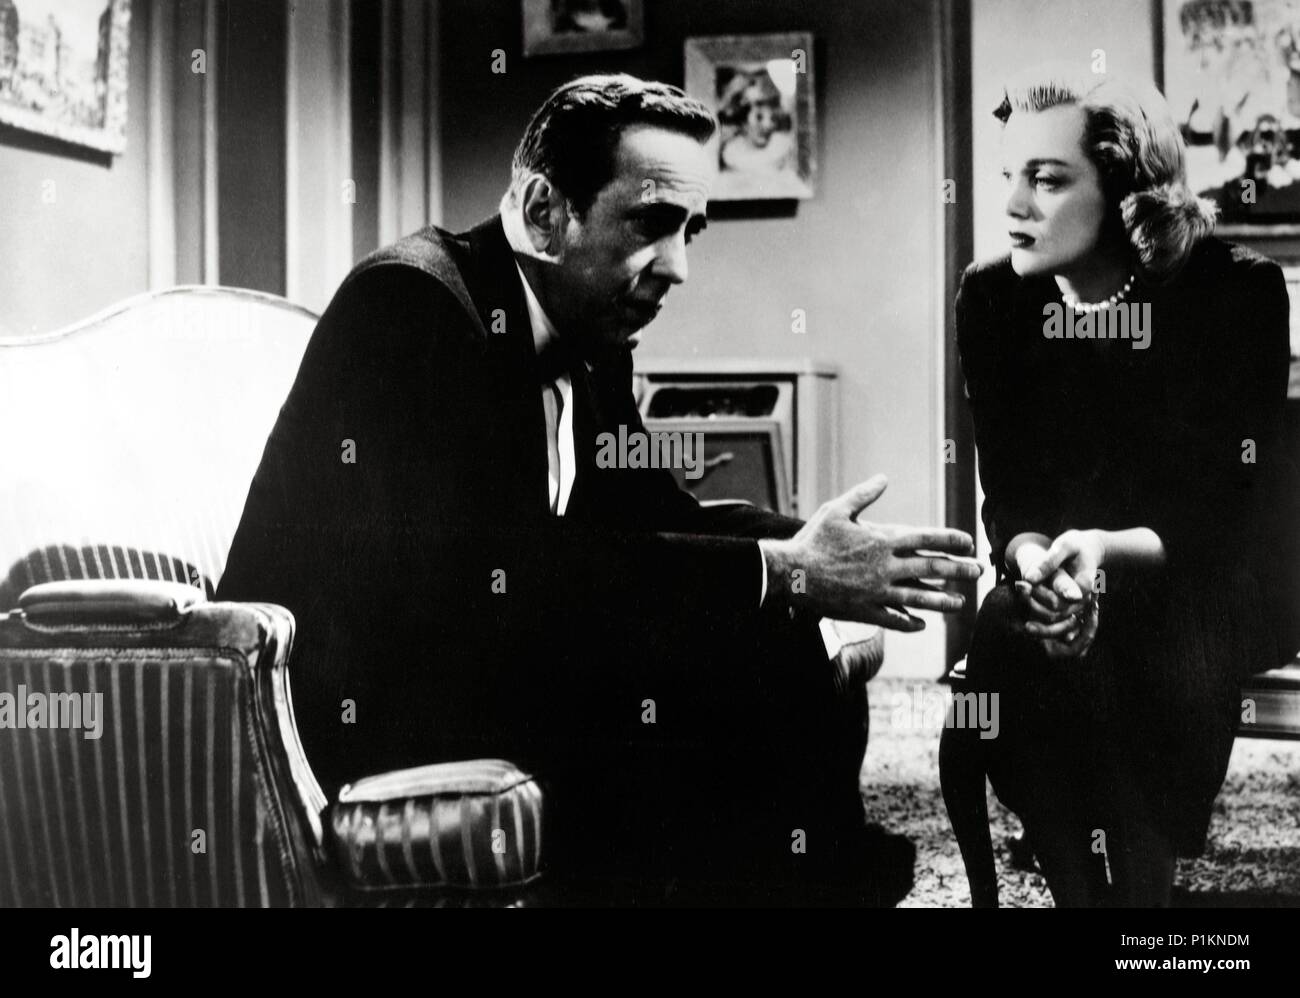 Original Film Title: THE HARDER THEY FALL.  English Title: THE HARDER THEY FALL.  Film Director: MARK ROBSON.  Year: 1956.  Stars: HUMPHREY BOGART; JAN STERLING. Credit: COLUMBIA PICTURES / Album Stock Photo